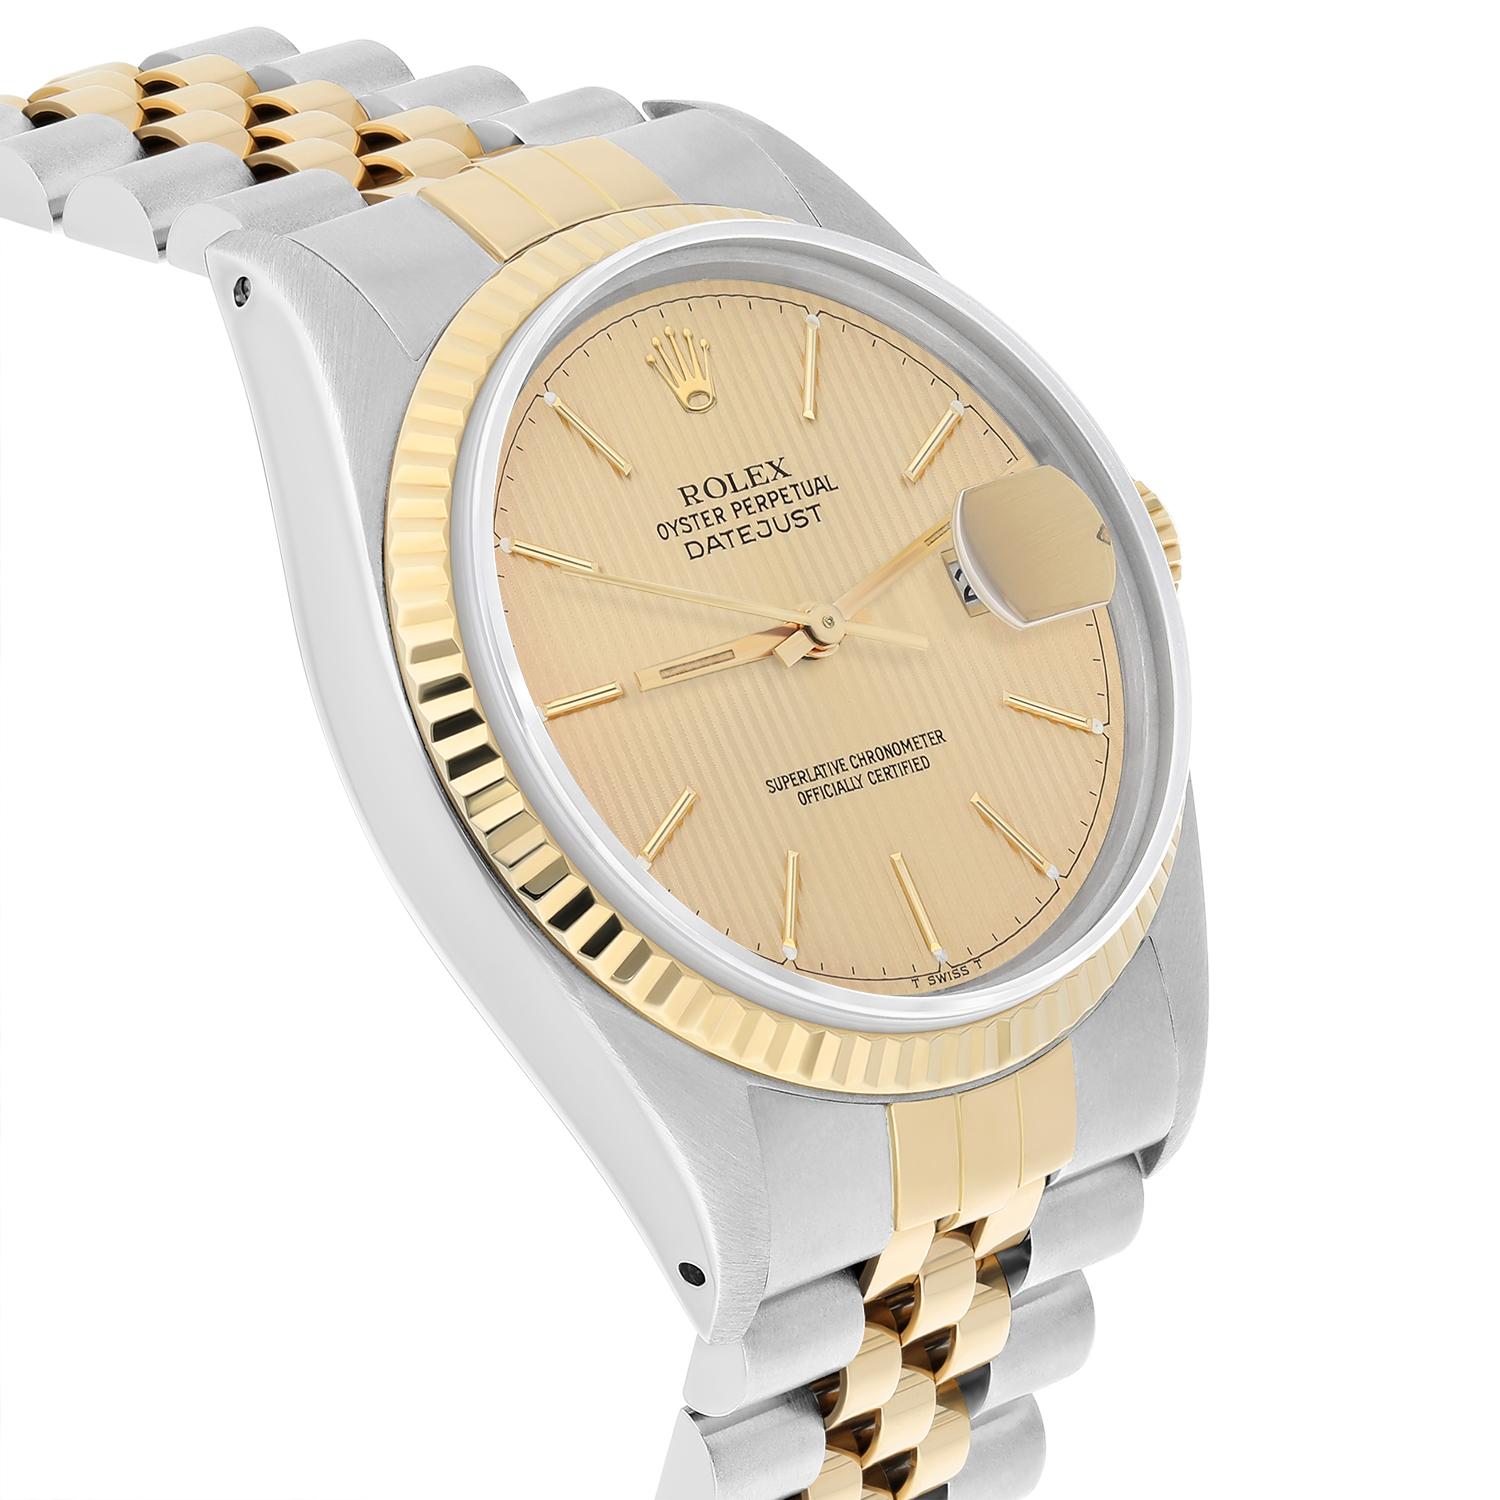 Rolex Datejust 36mm Two Tone Champagne Dial Jubilee 16013 Circa 1988 Papers In Excellent Condition For Sale In New York, NY